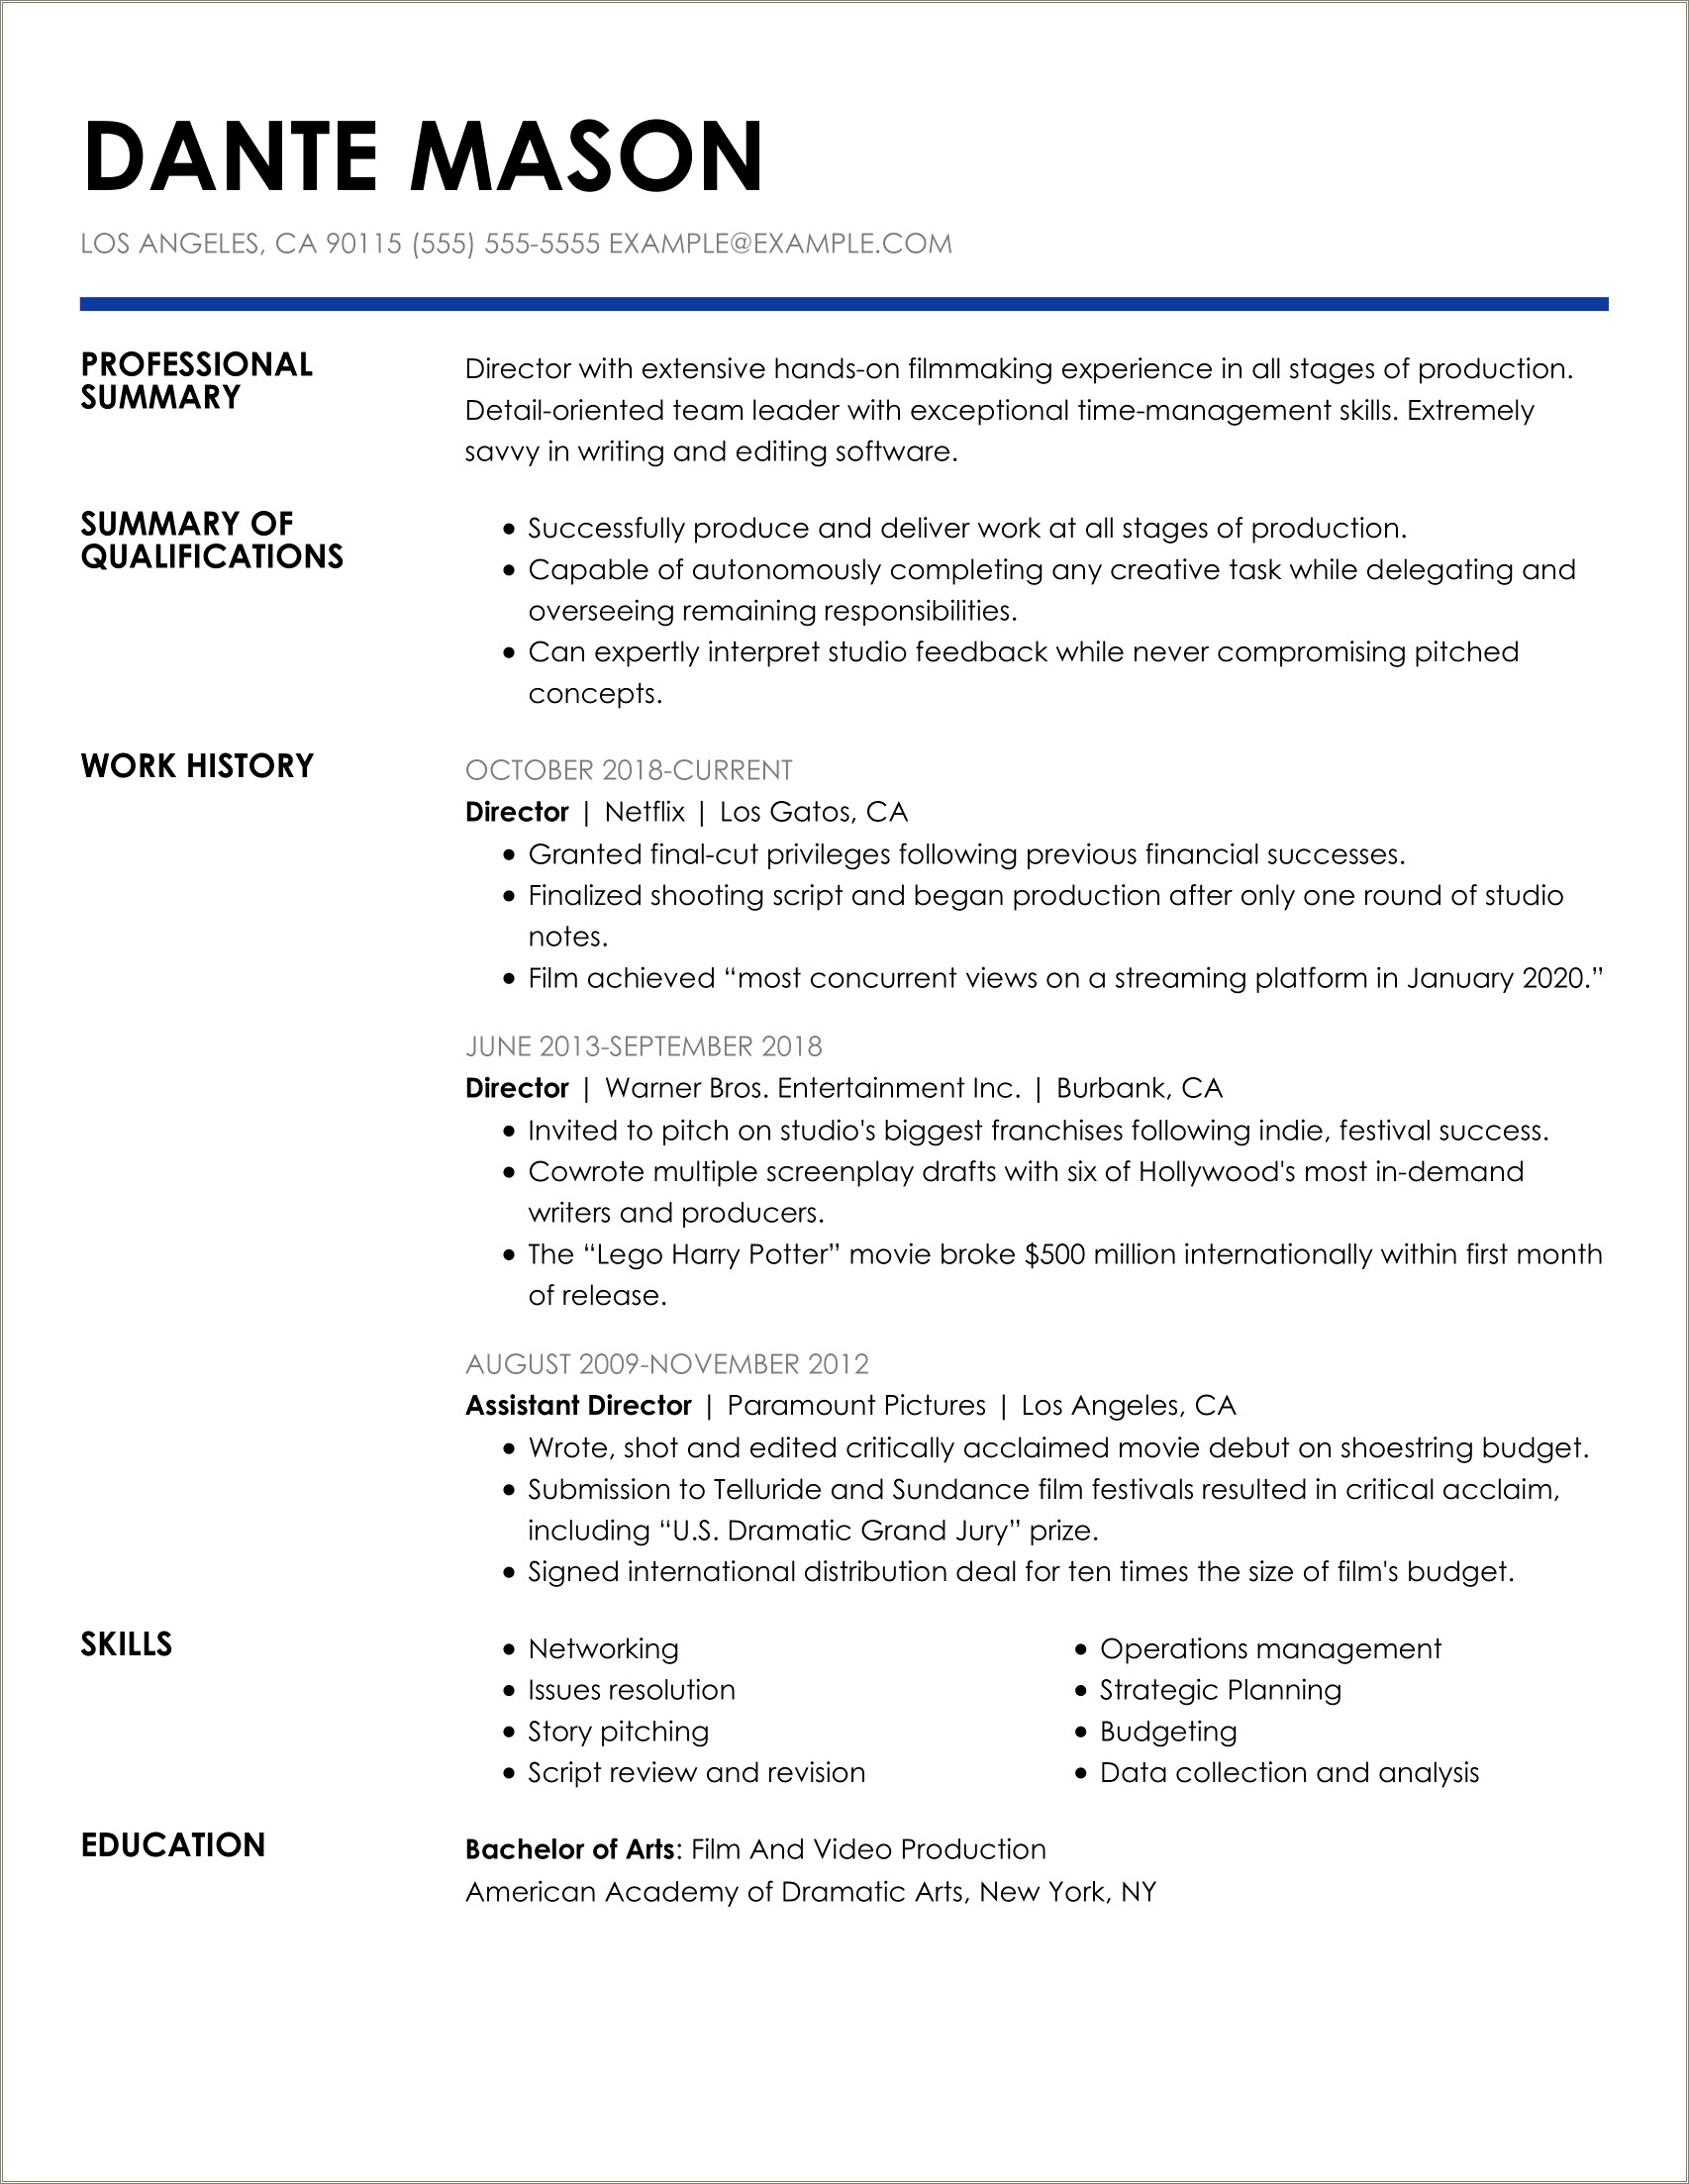 Does A Resume Need Professional Summary And Skills